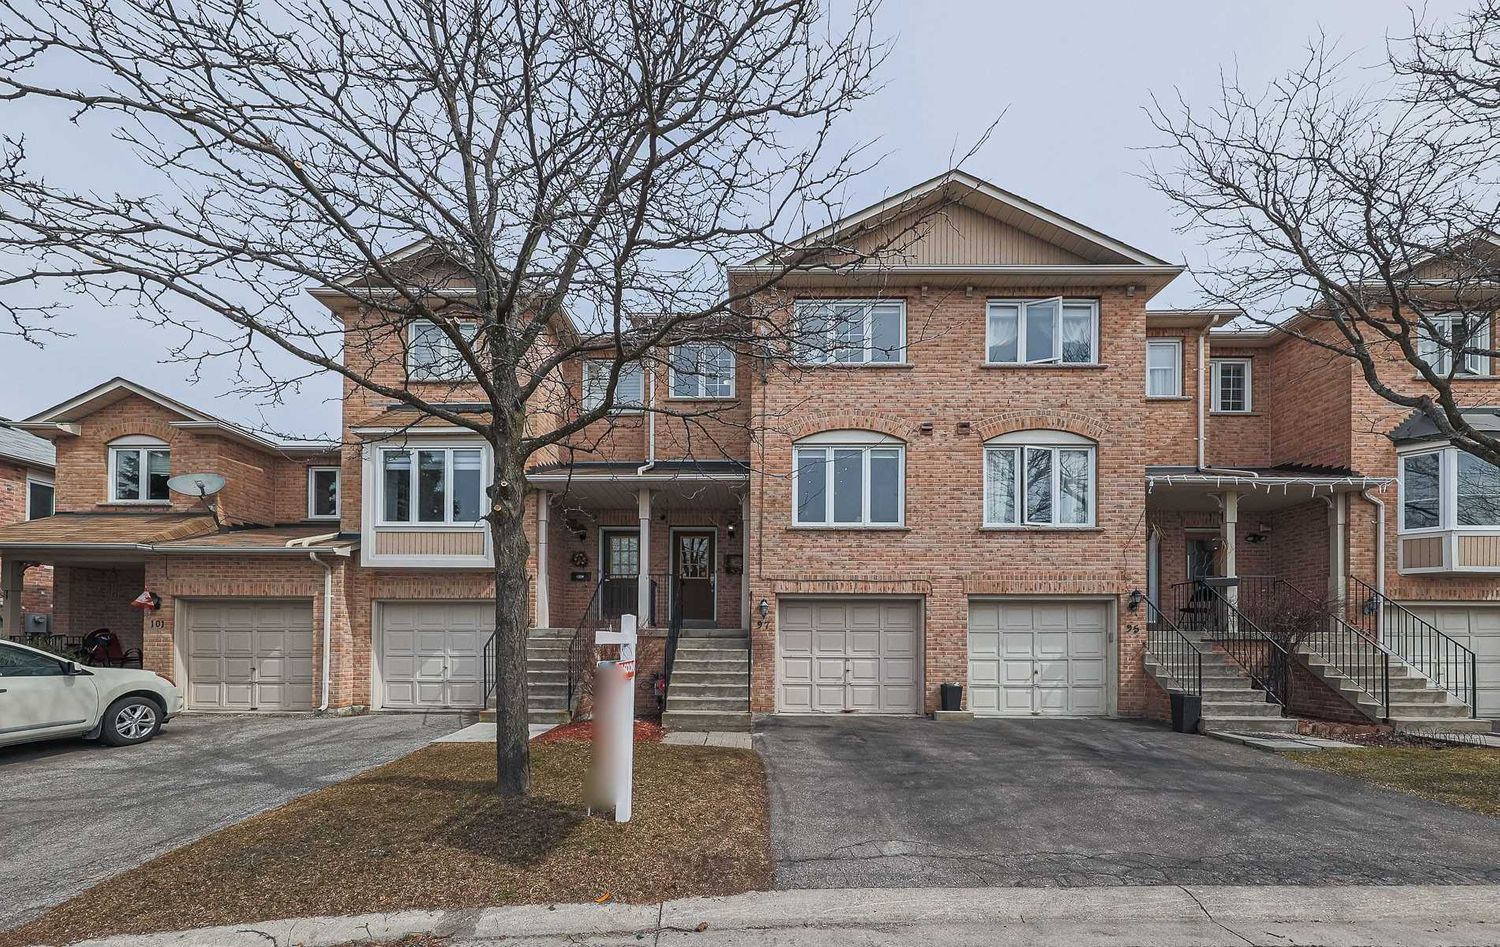 1-150 Rougehaven Way. Rougehaven Way Townhomes is located in  Markham, Toronto - image #1 of 2